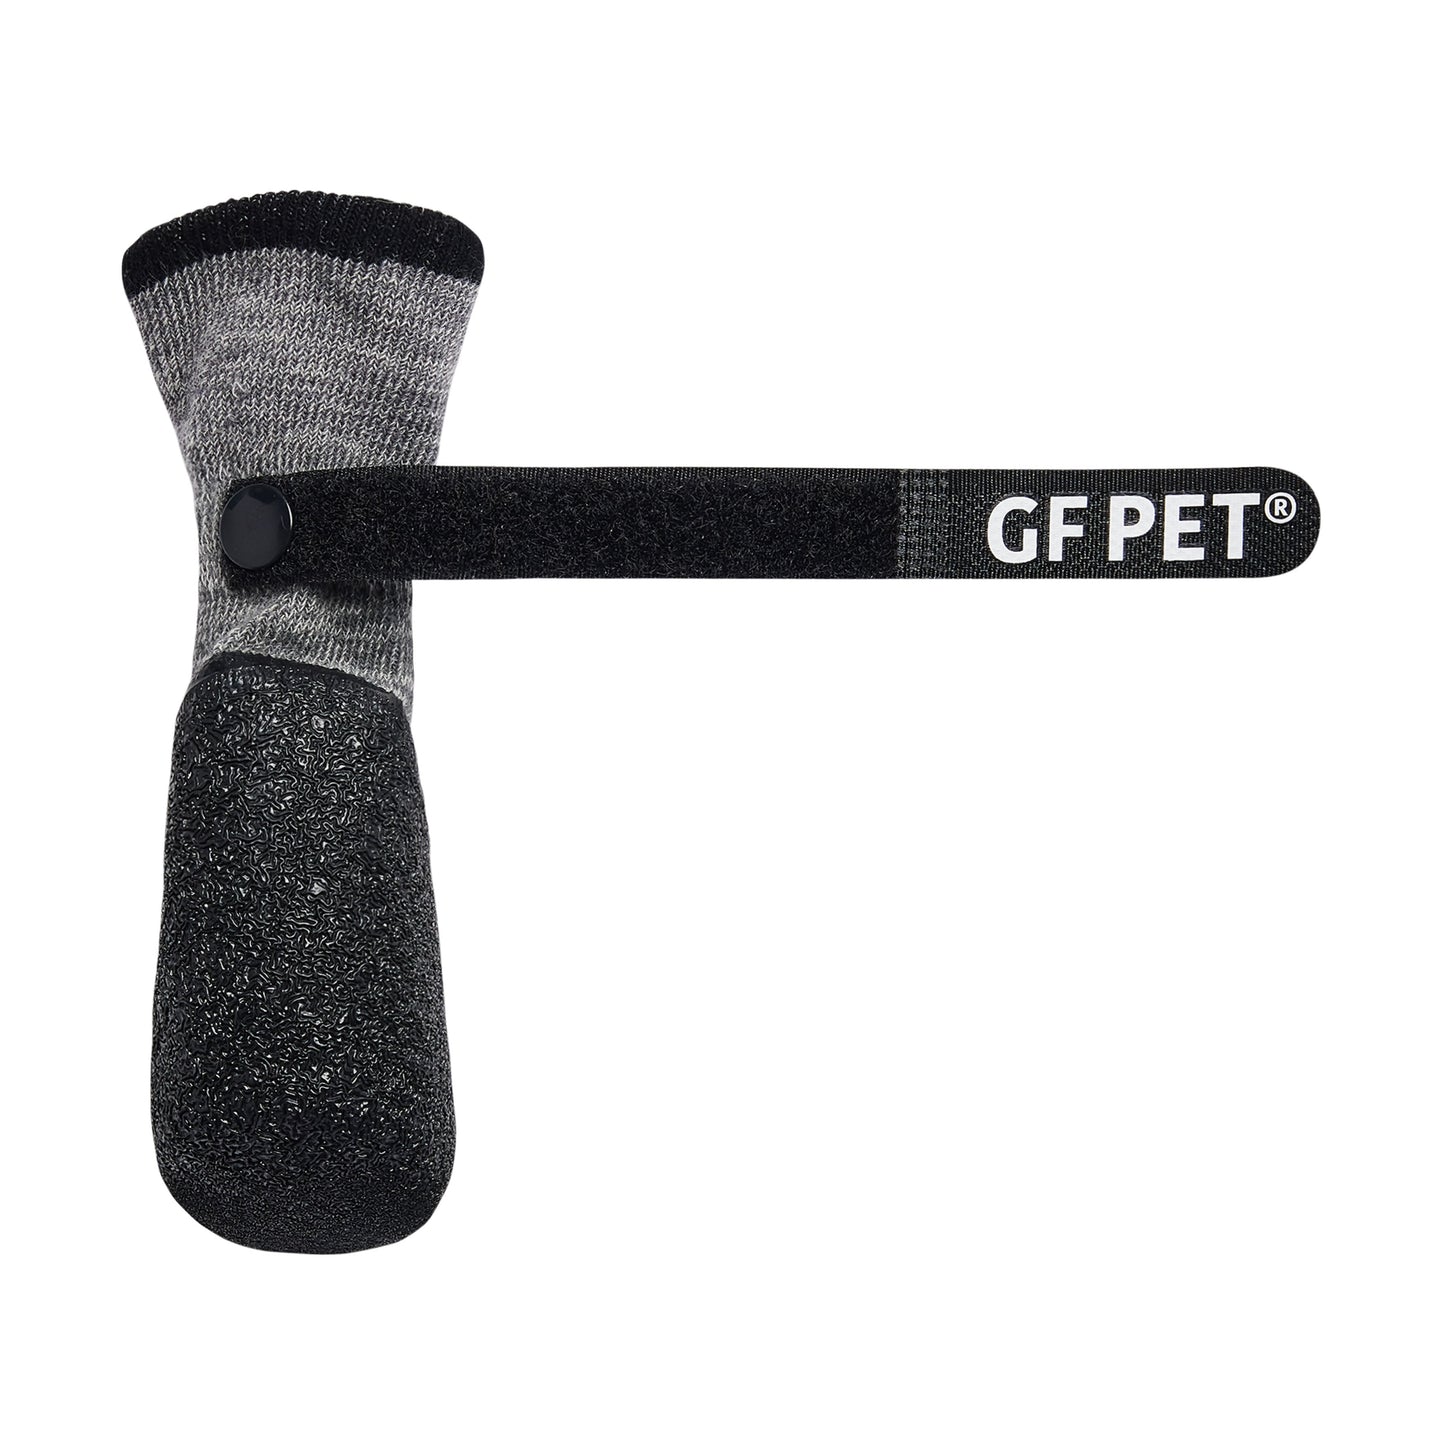 All Terrain Boots - Charcoal by GF Pet